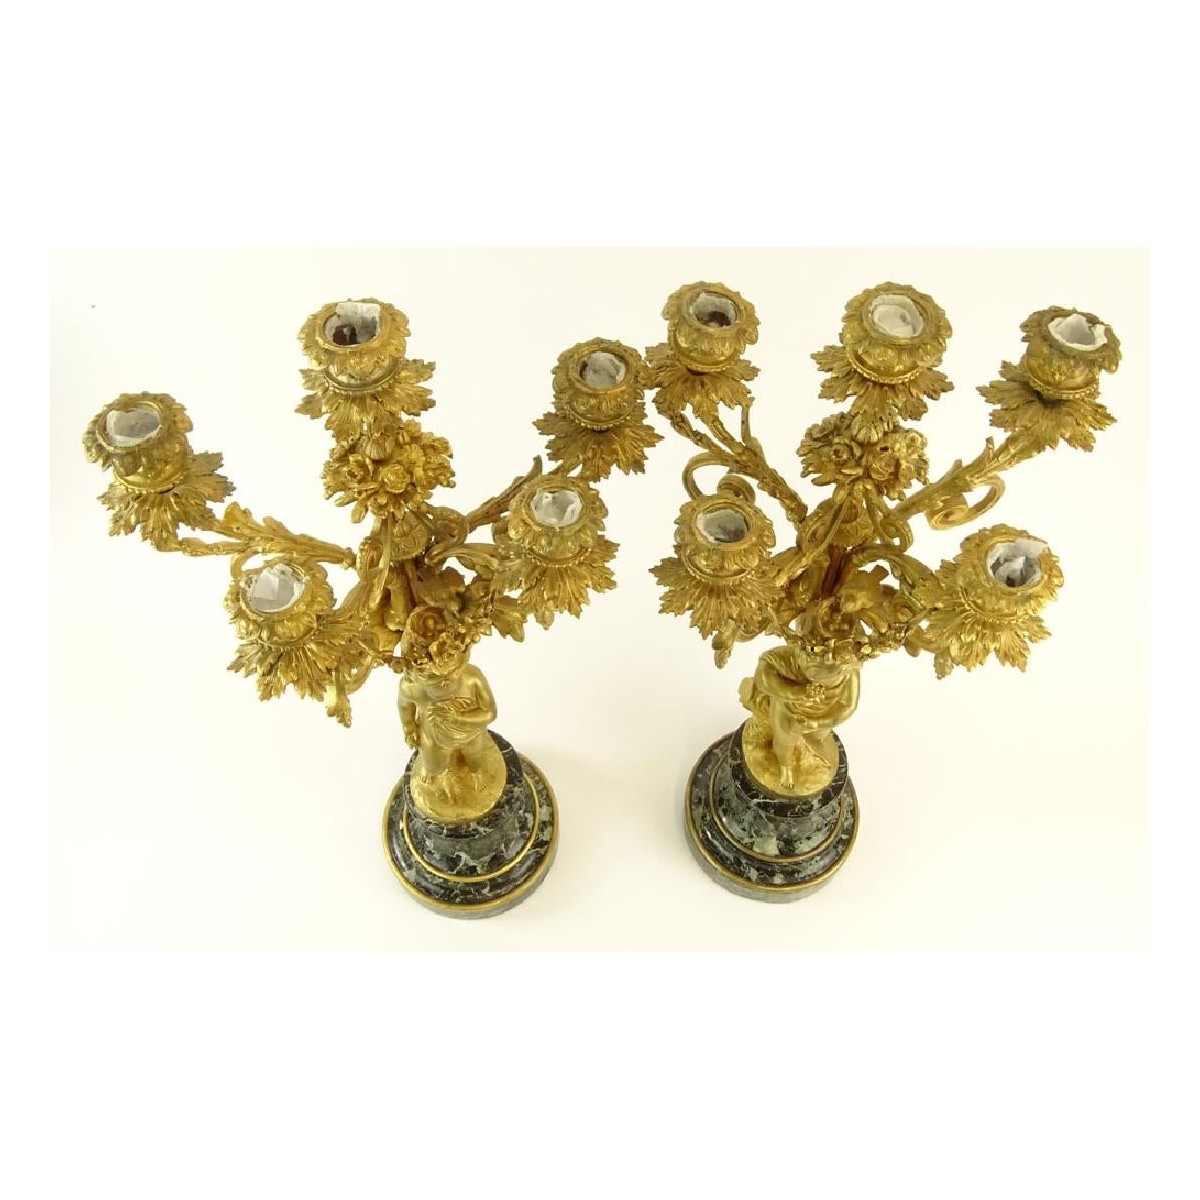 Early 20th C. Five Light Candelabra